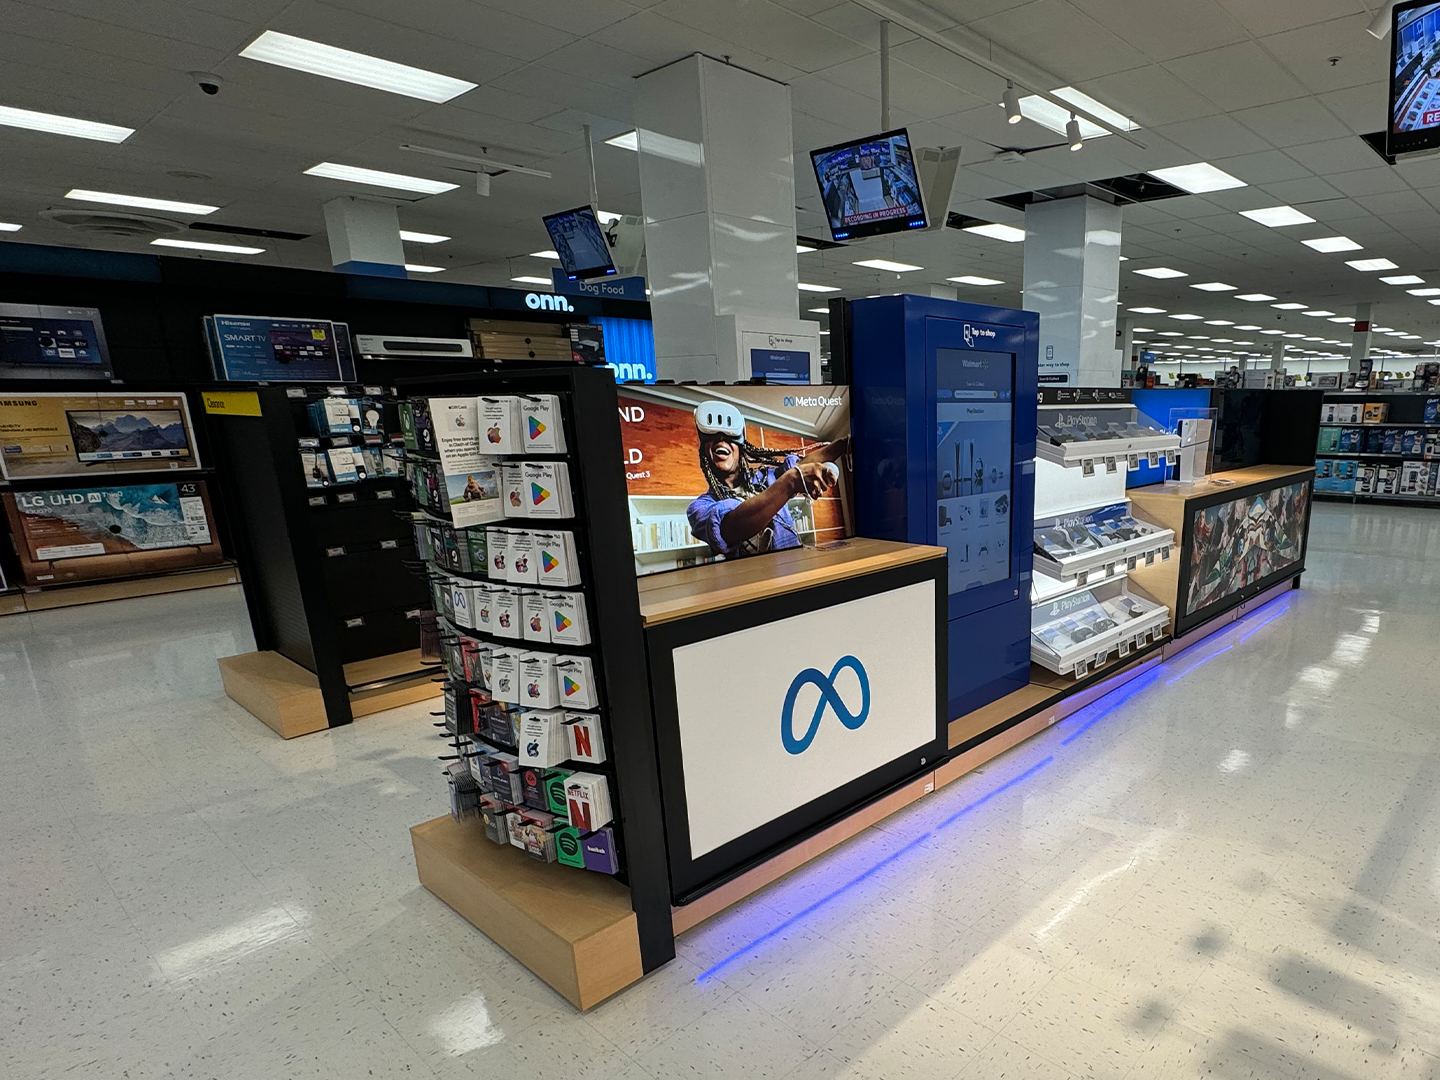 Angle view of the custom electronic display at Walmart, showcasing the sleek design and structure